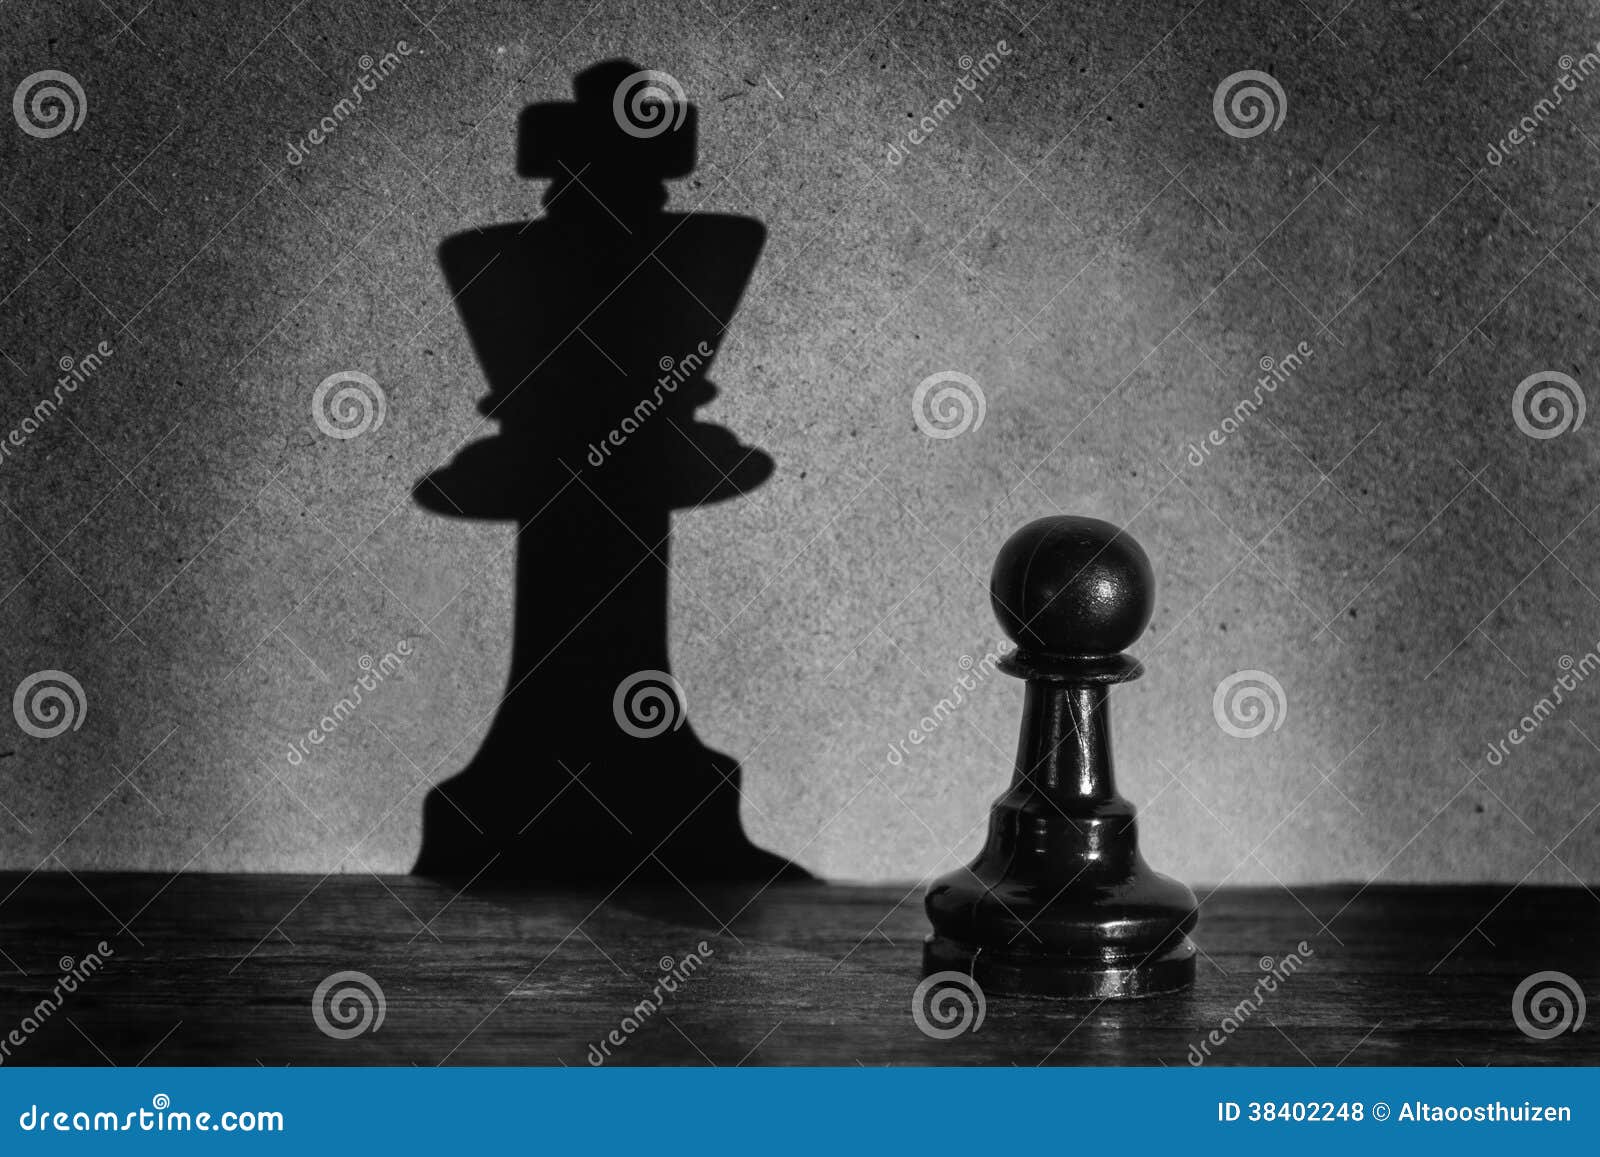 chess pawn standing in a spotlight that make a shadow actistic